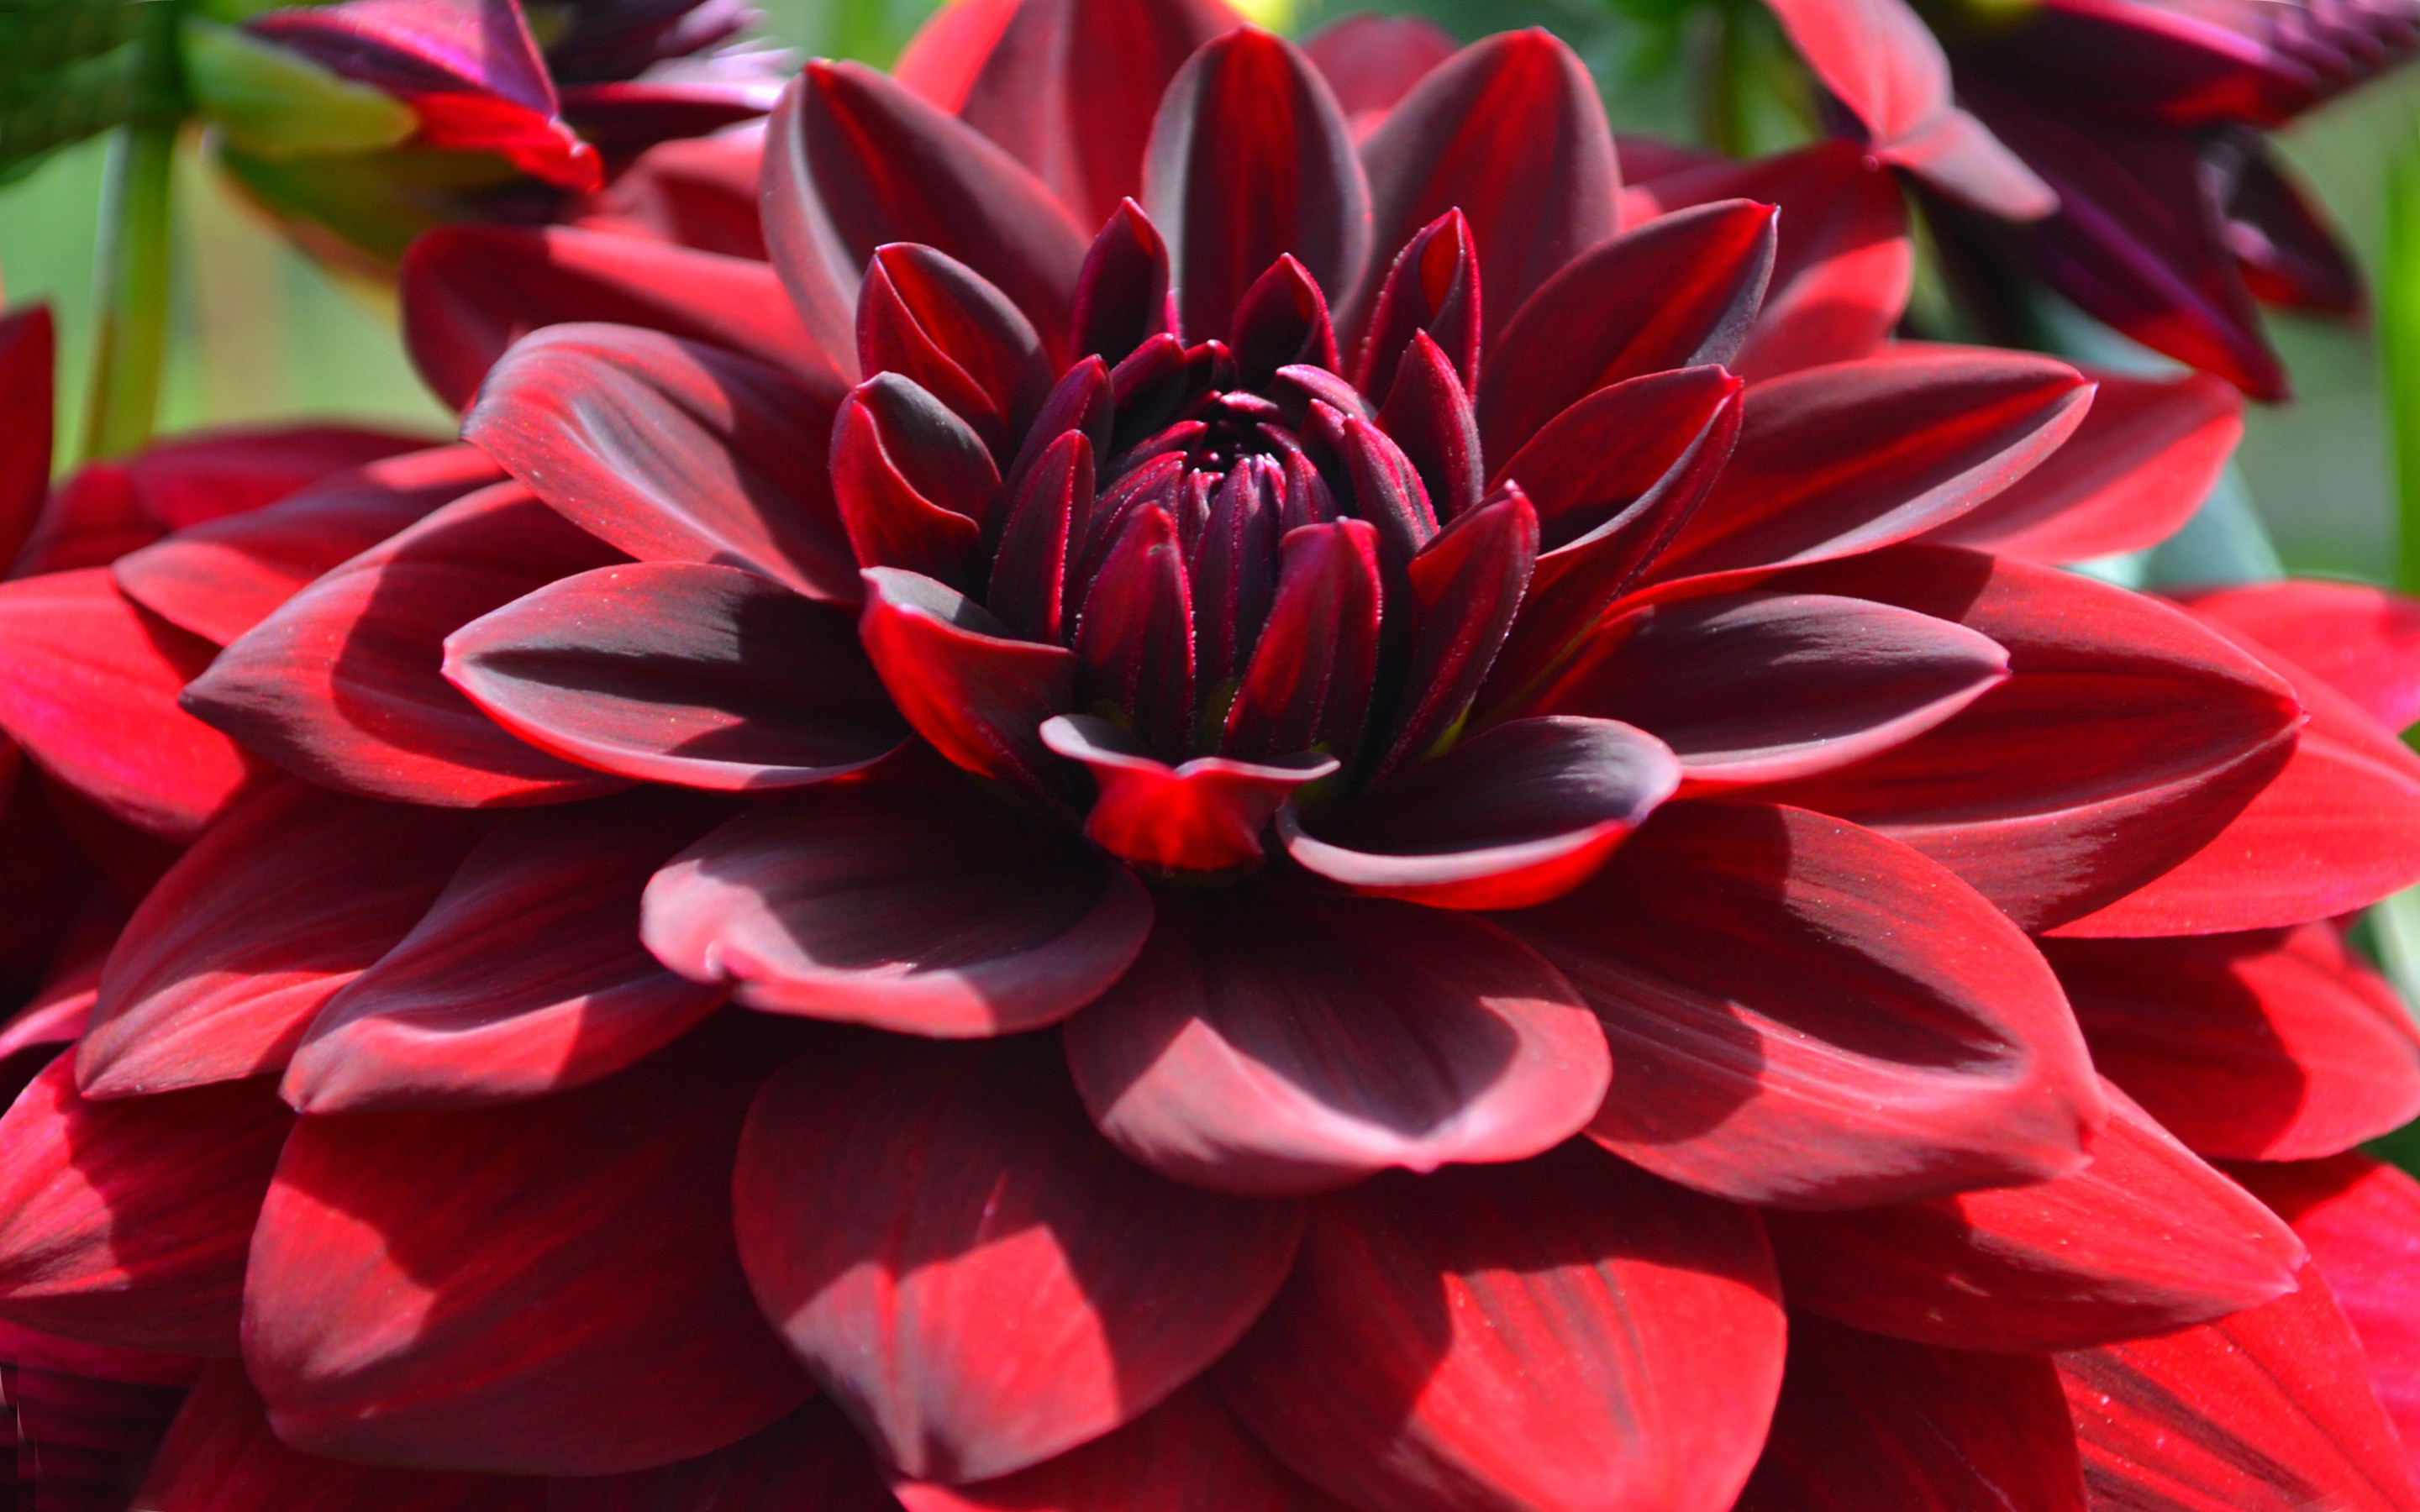 2880x1800 Download Red Dahlia Macro Flowers Desktop Hd Wallpapers For Mobile Phones  And Computer 2880Ã1800